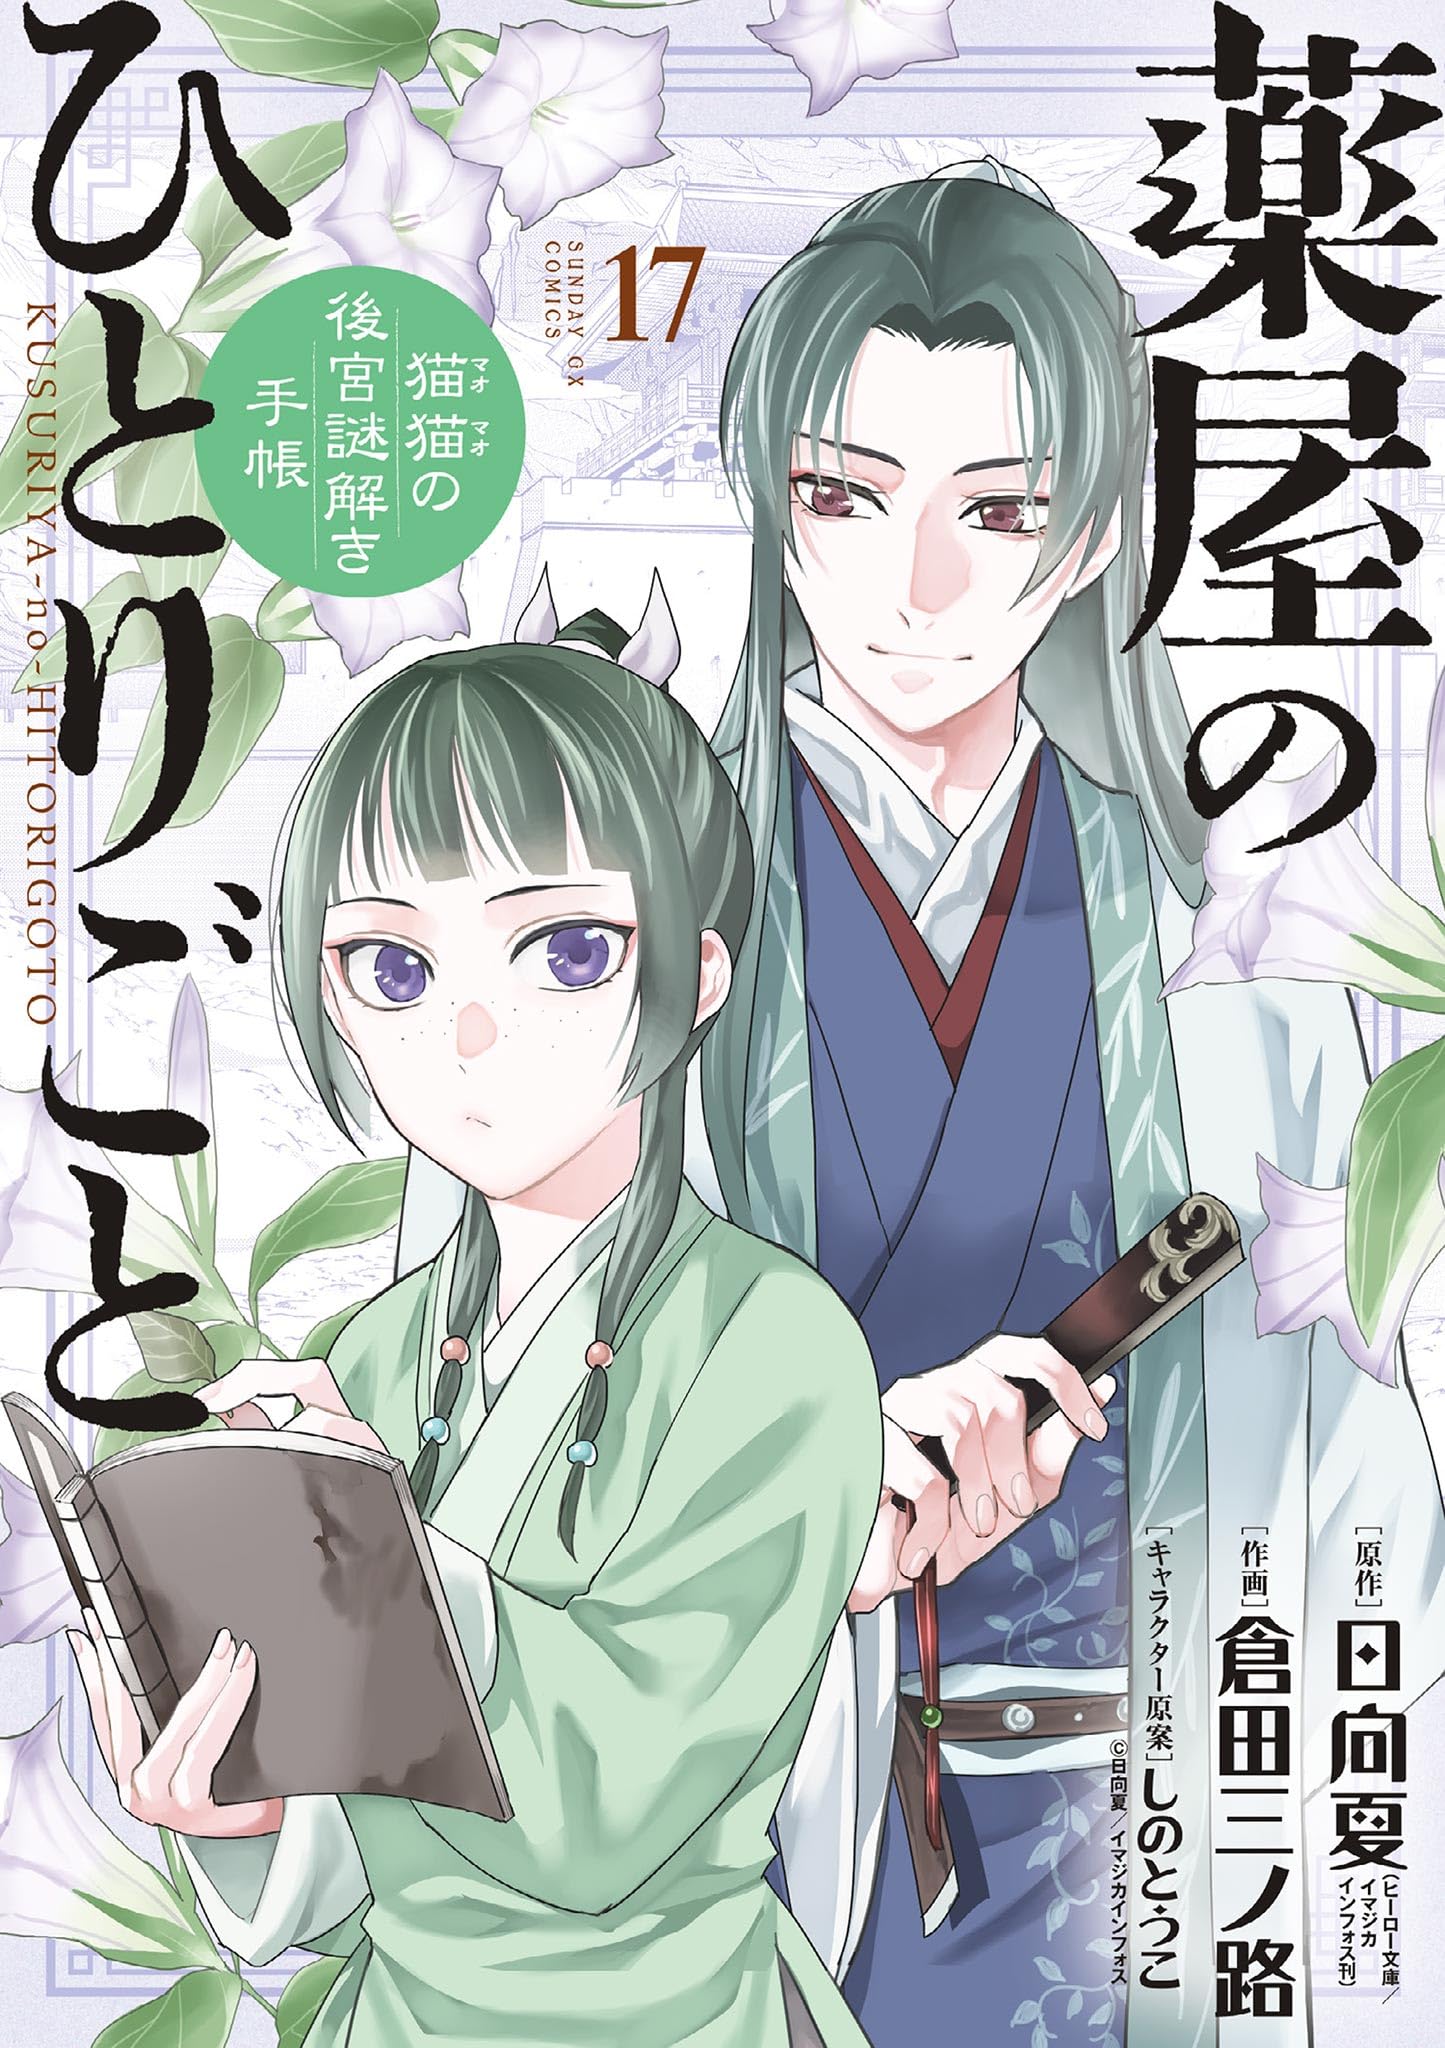 Manga Mogura RE on X: Renaissance Historical Medicine Manga Anatomia vol  2 by Takagi Rei Set in 15th Century Renaissance Italy, a young surgeon  questions the current medical practices & wants to